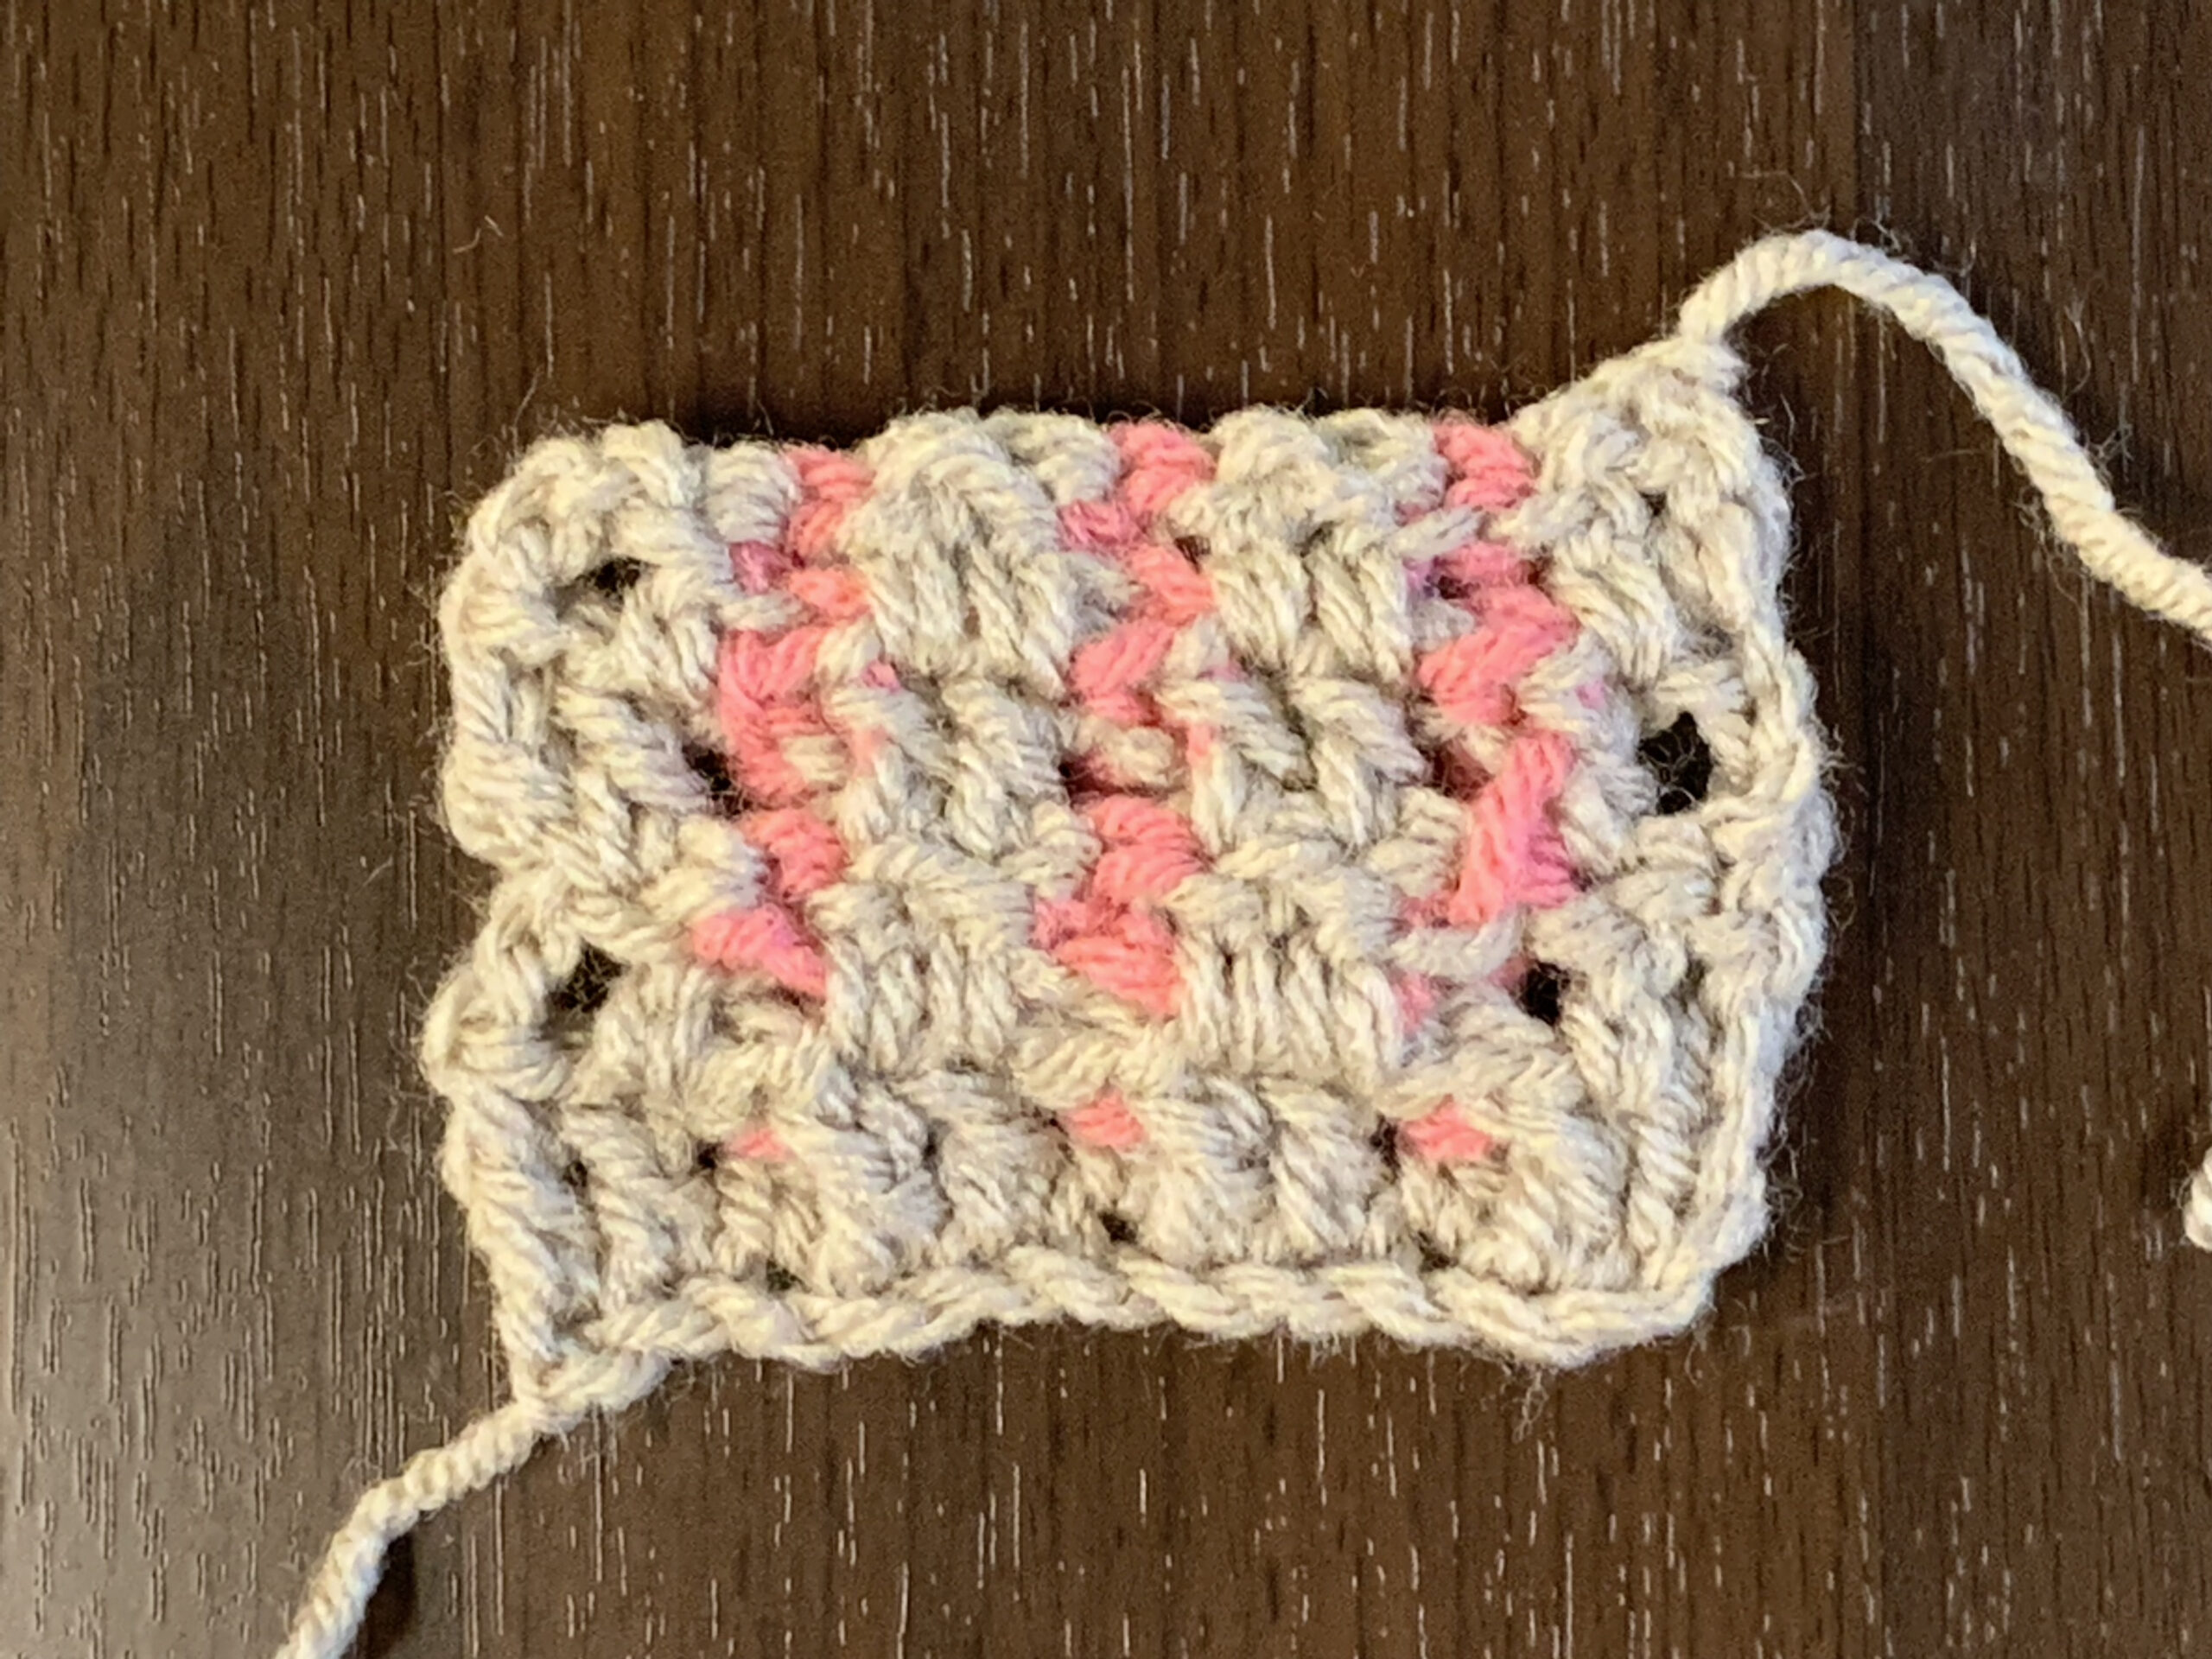 Back side of crochet cable stitches